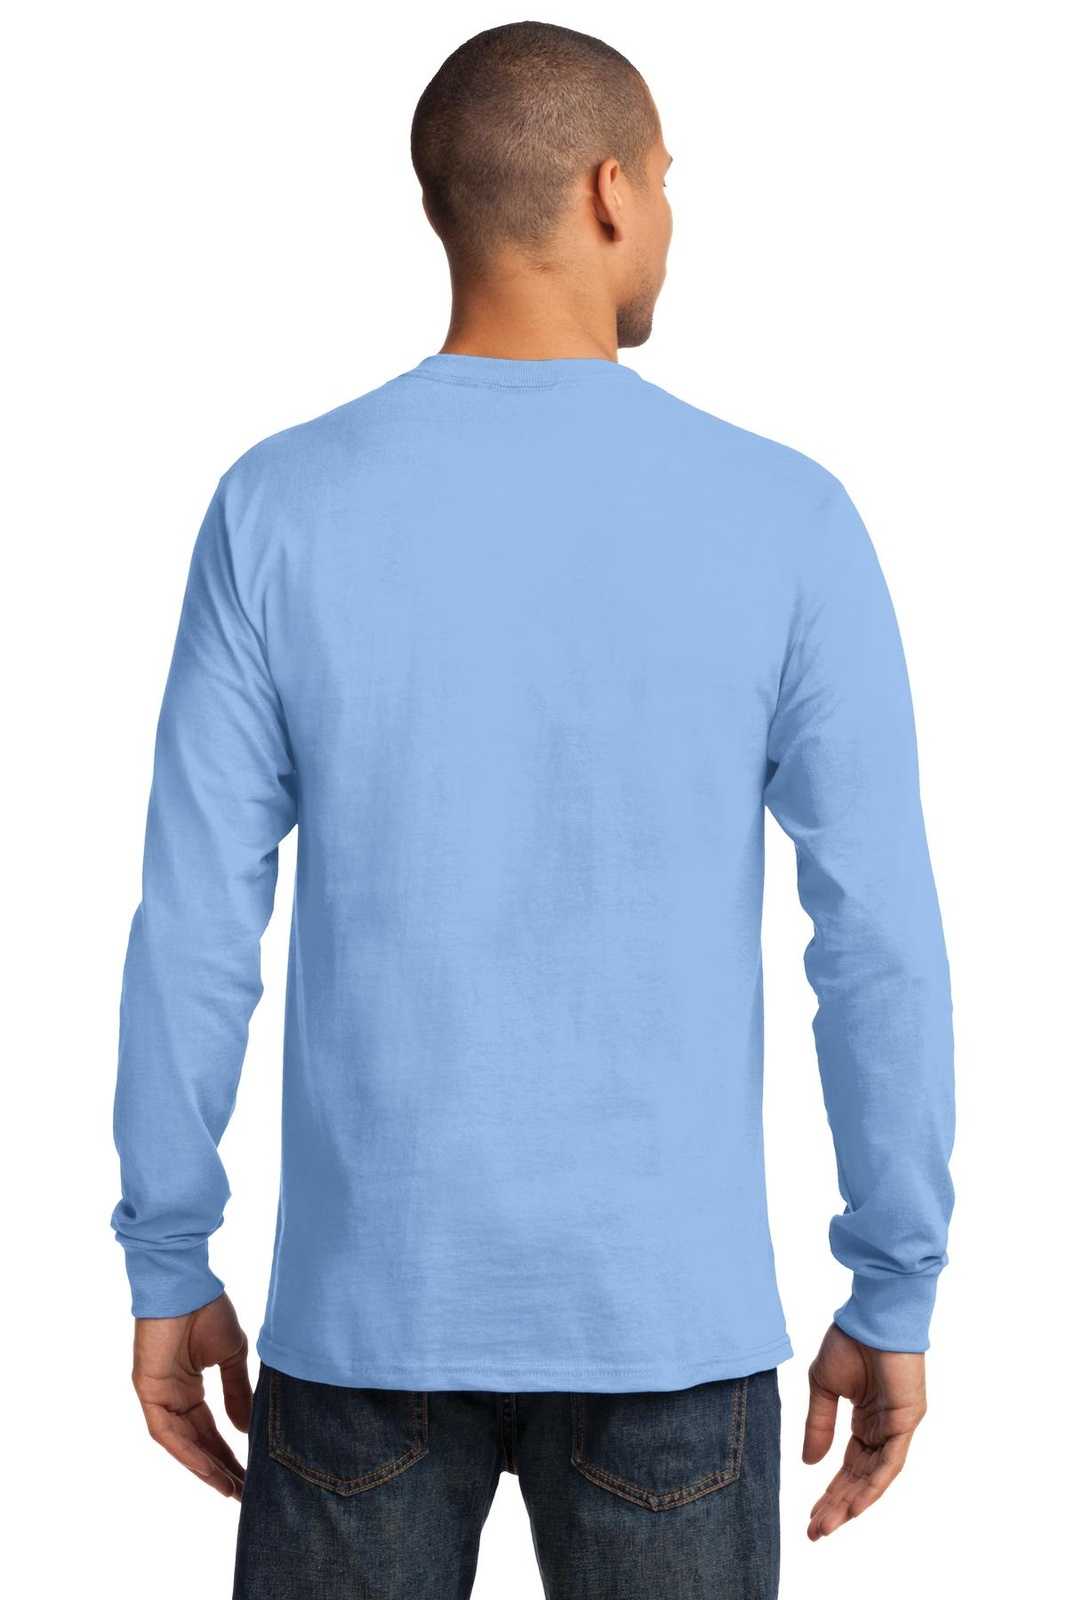 Port &amp; Company PC61LS Long Sleeve Essential Tee - Light Blue - HIT a Double - 2